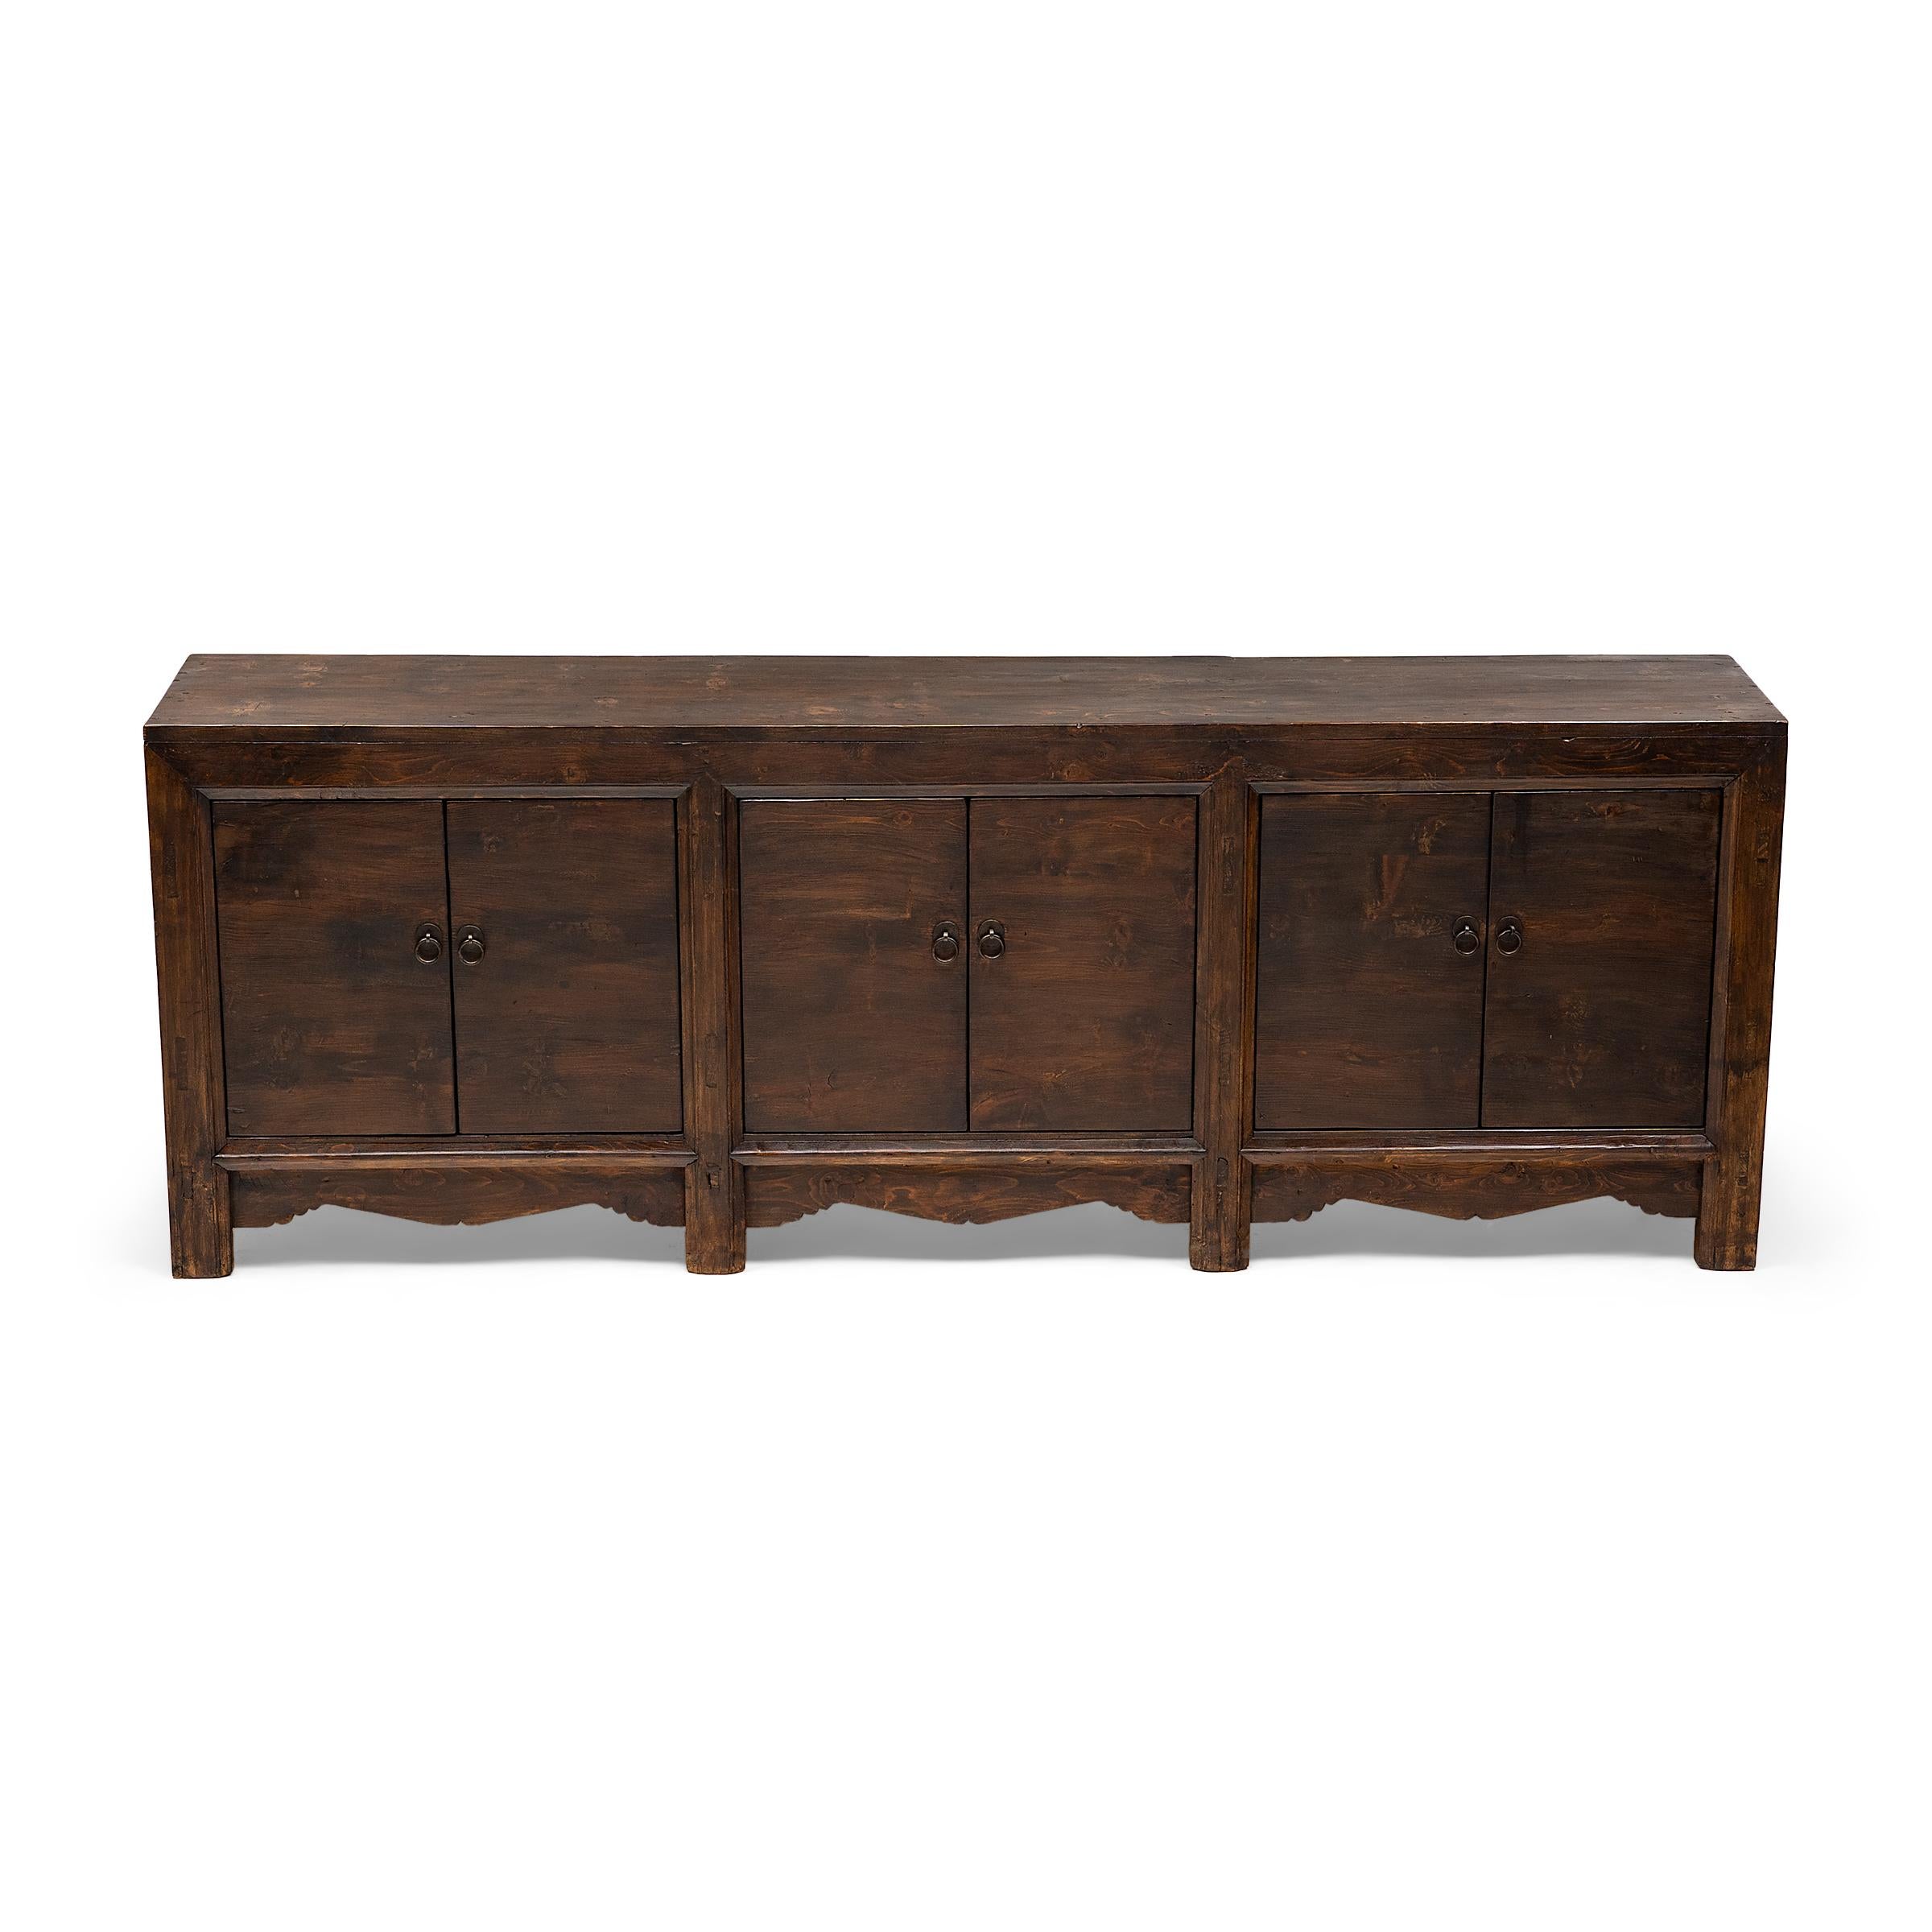 20th Century Chinese Pasture Sideboard, c. 1900 For Sale